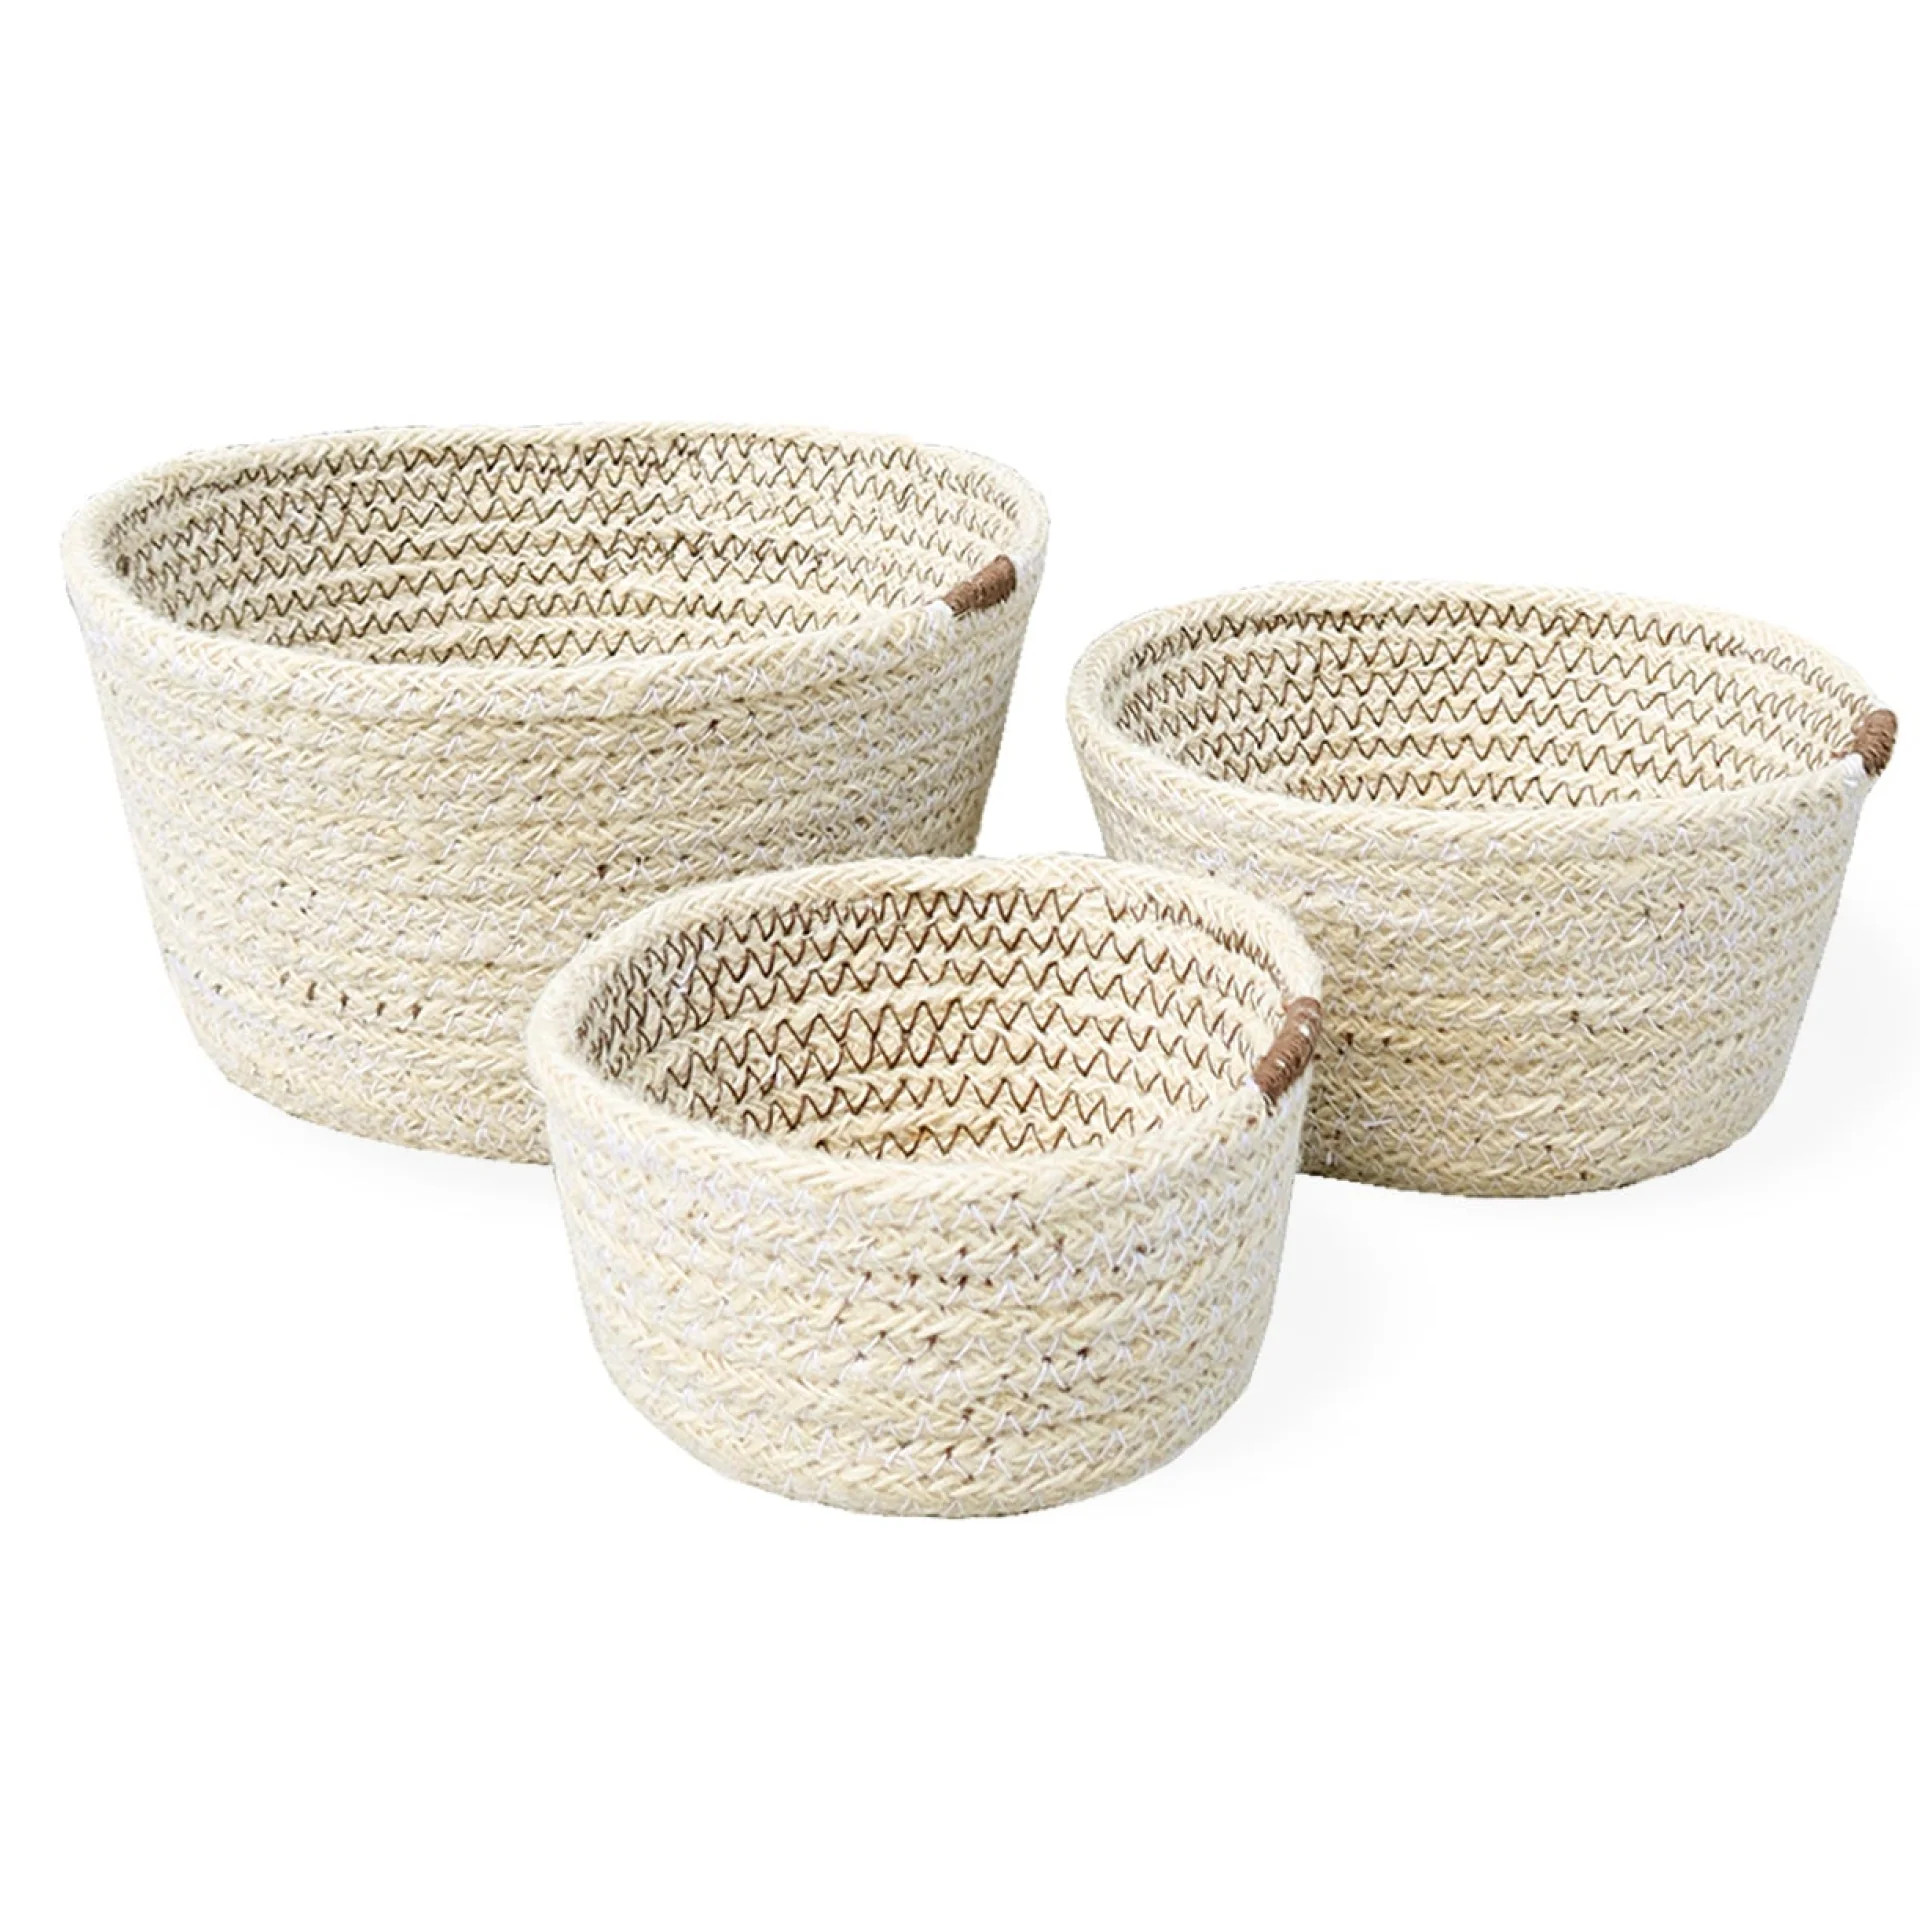 Set of 3 Handwoven Storage Baskets - Natural - Cove Home | Cove Home